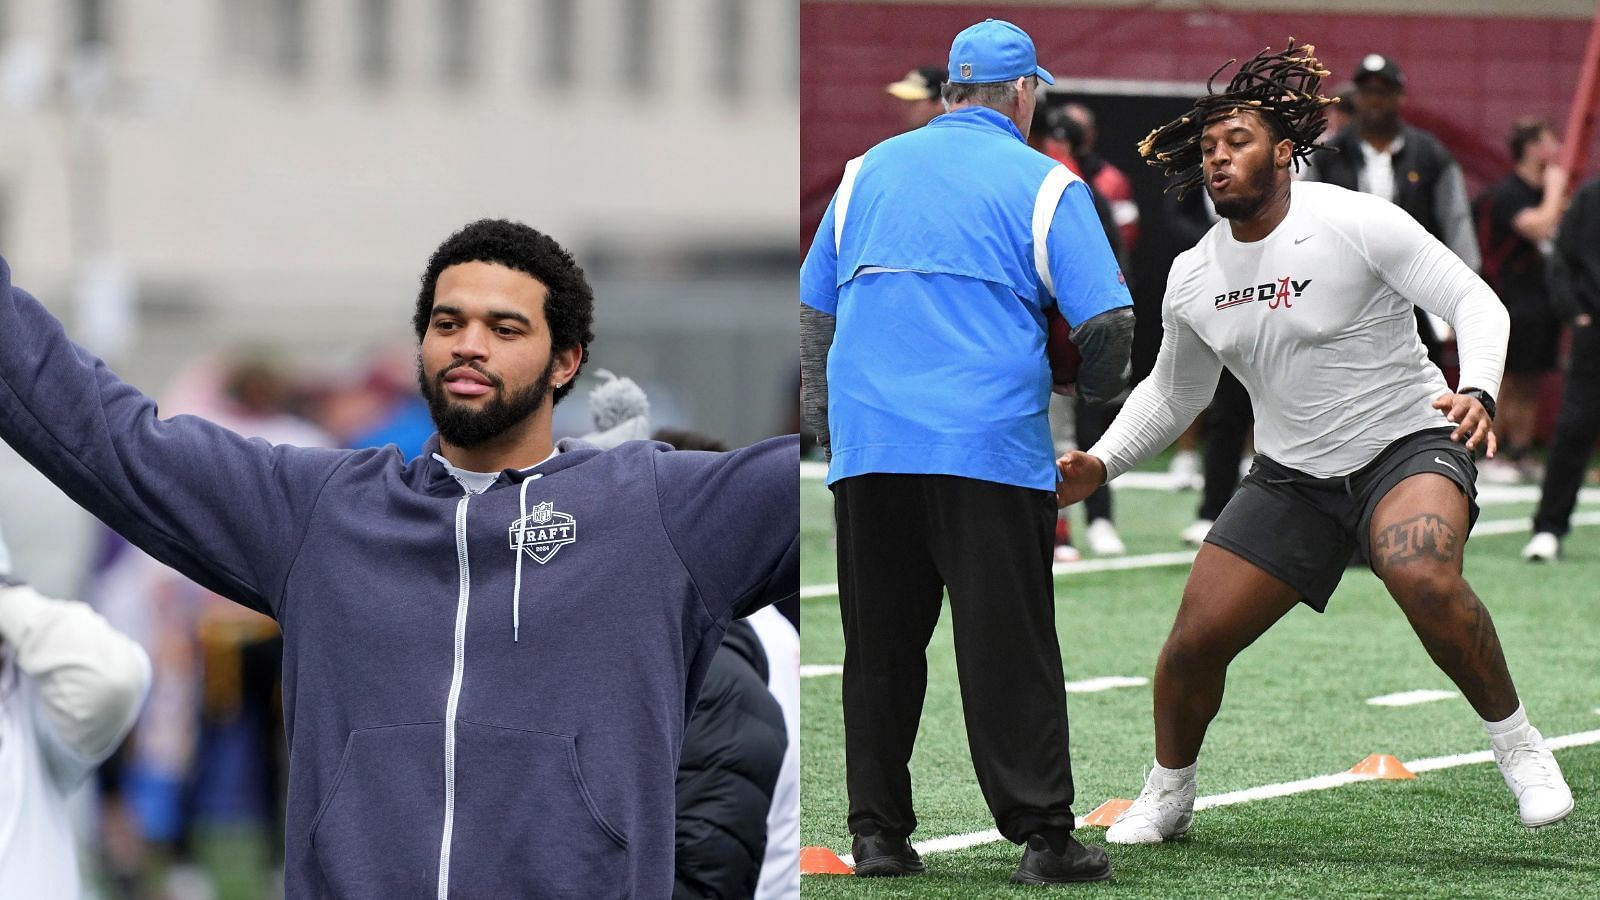 Caleb WIlliams and JC Lathem are two five-star prospects now expected to be first-round NFL picks.